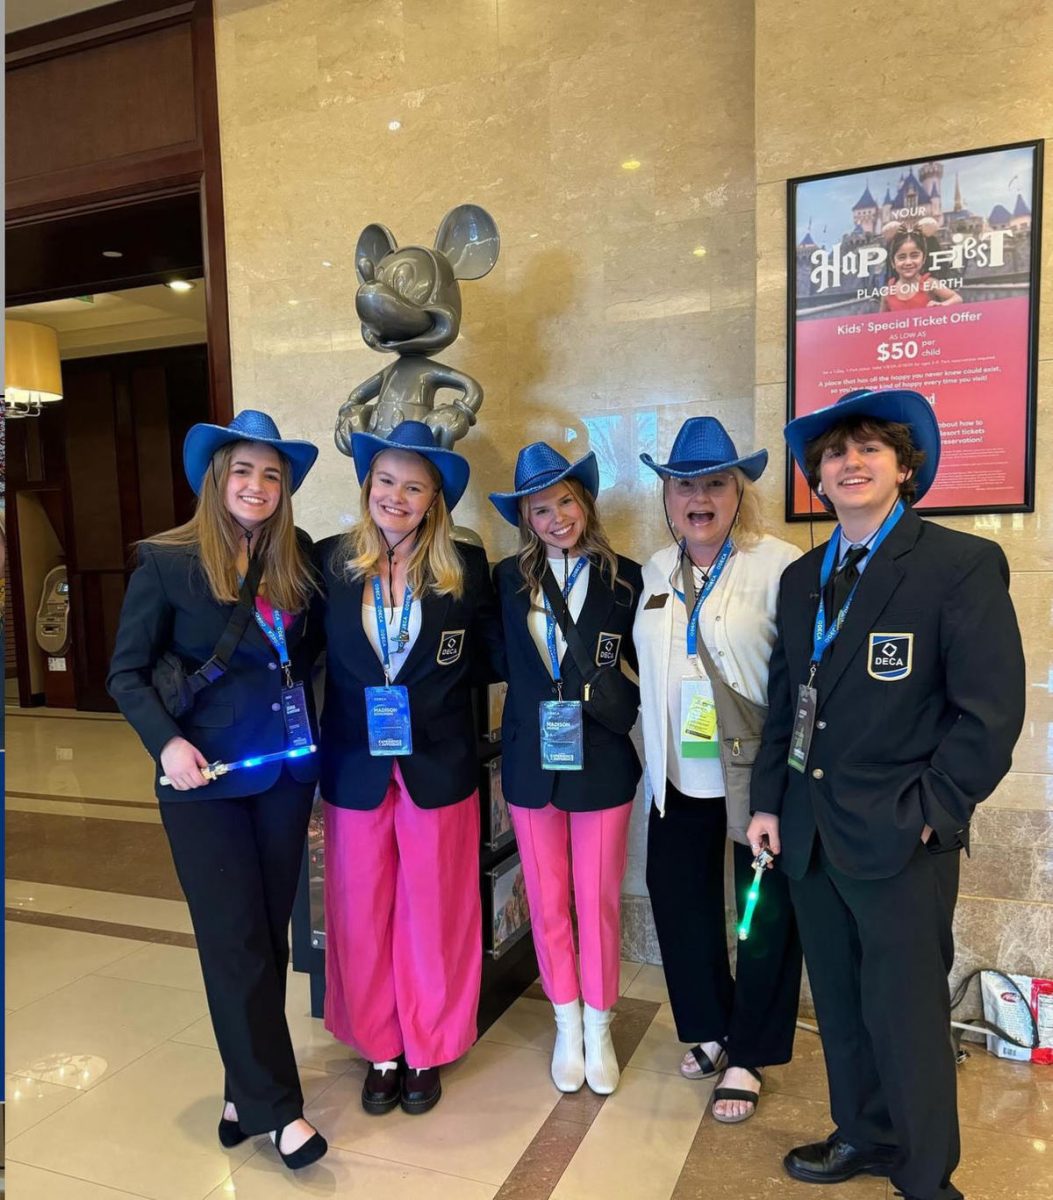 (From left to right) Jenna, Madison Sorenson, Madison Hodge, Mrs. Lamoureux, and Aiden Craft posing in front of a gray Mickey Mouse statue at the Anaheim Convention Center.